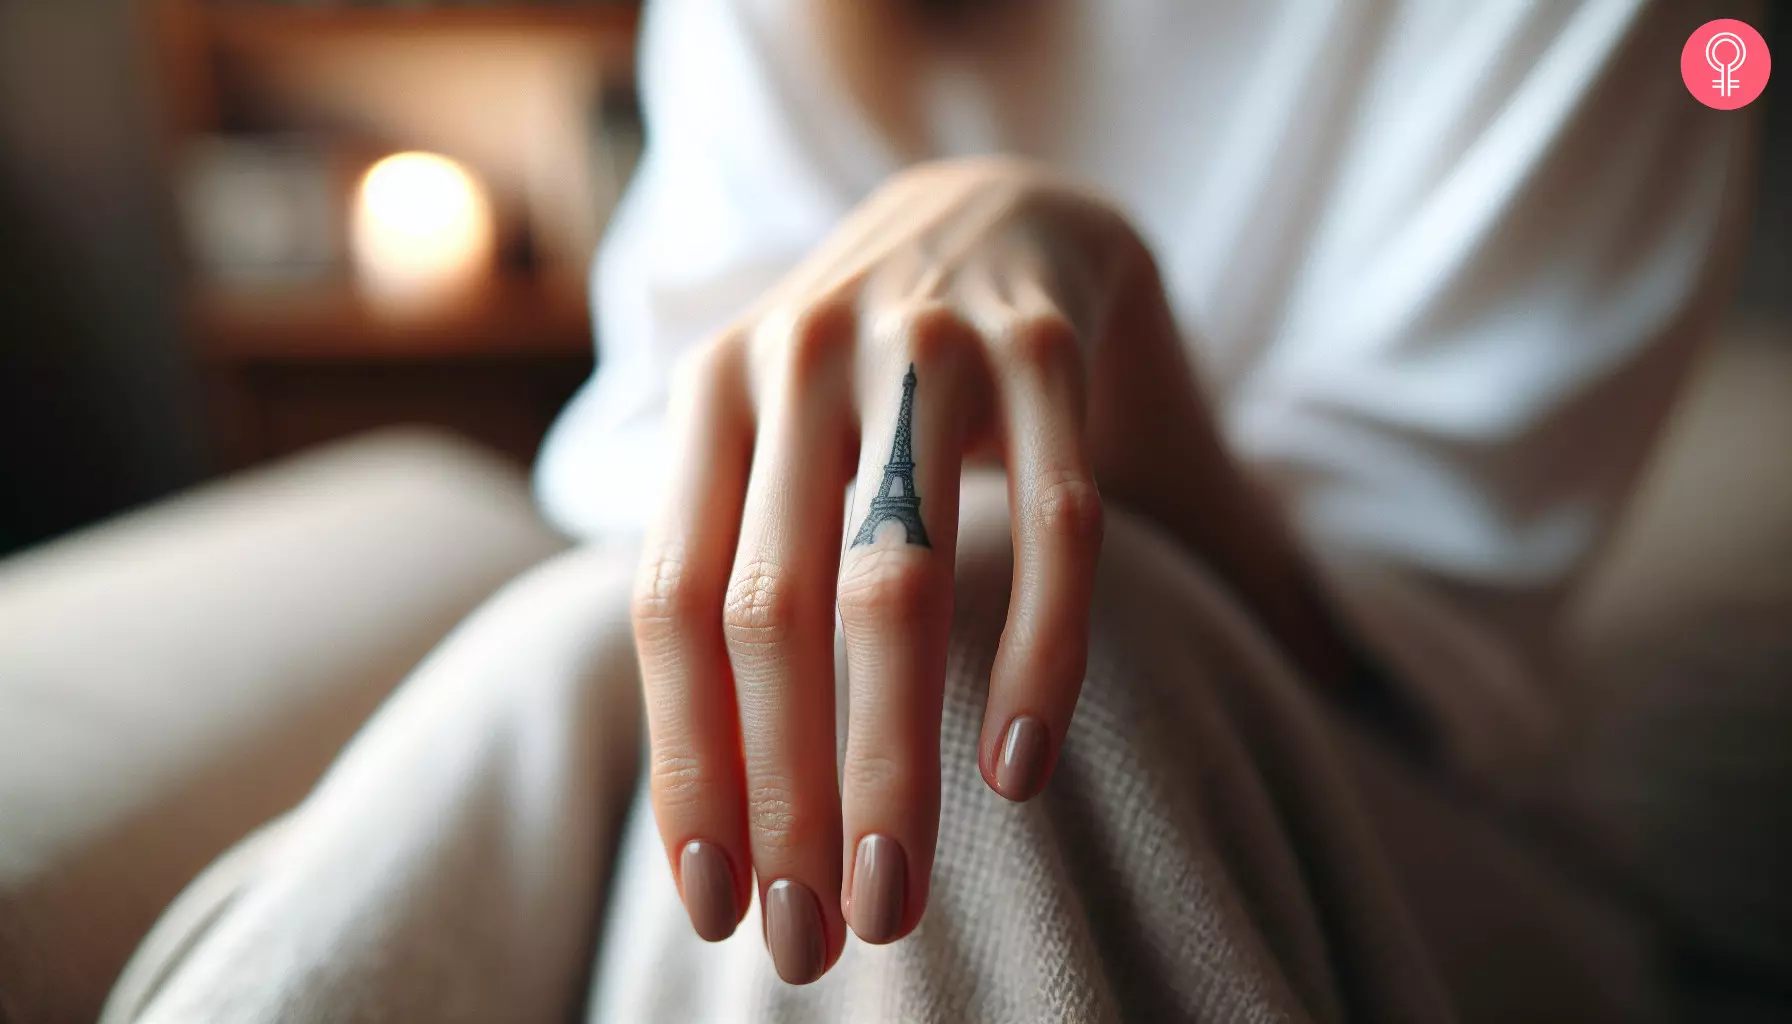 A woman with an Eiffel Tower tattoo on her finger